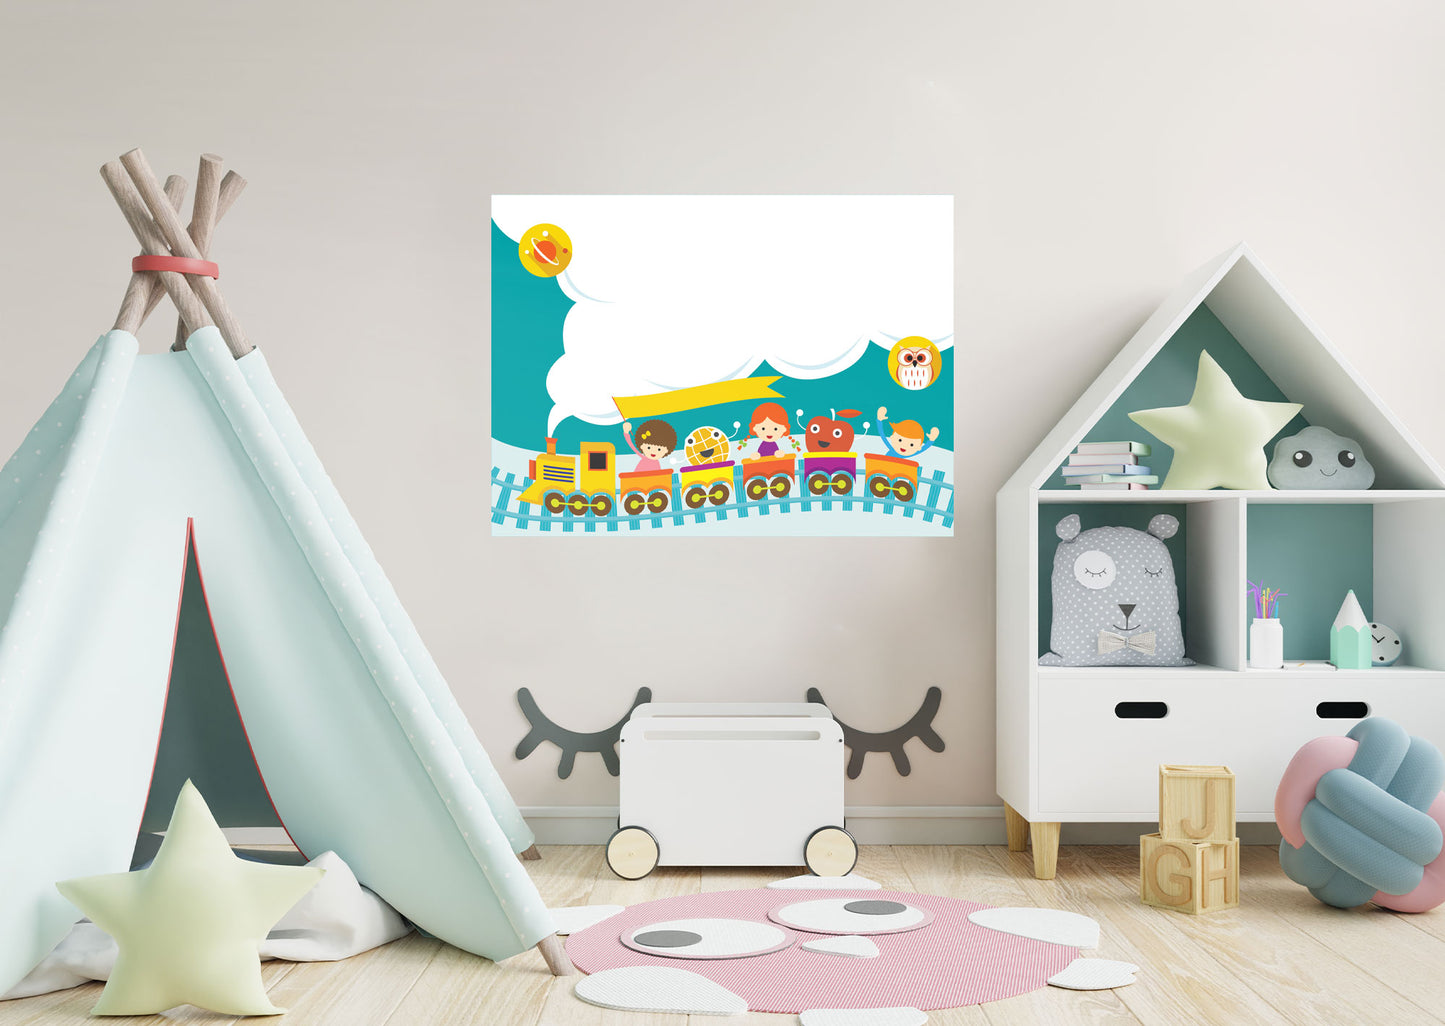 Nursery:  Kid's Train Dry Erase        -   Removable Wall   Adhesive Decal